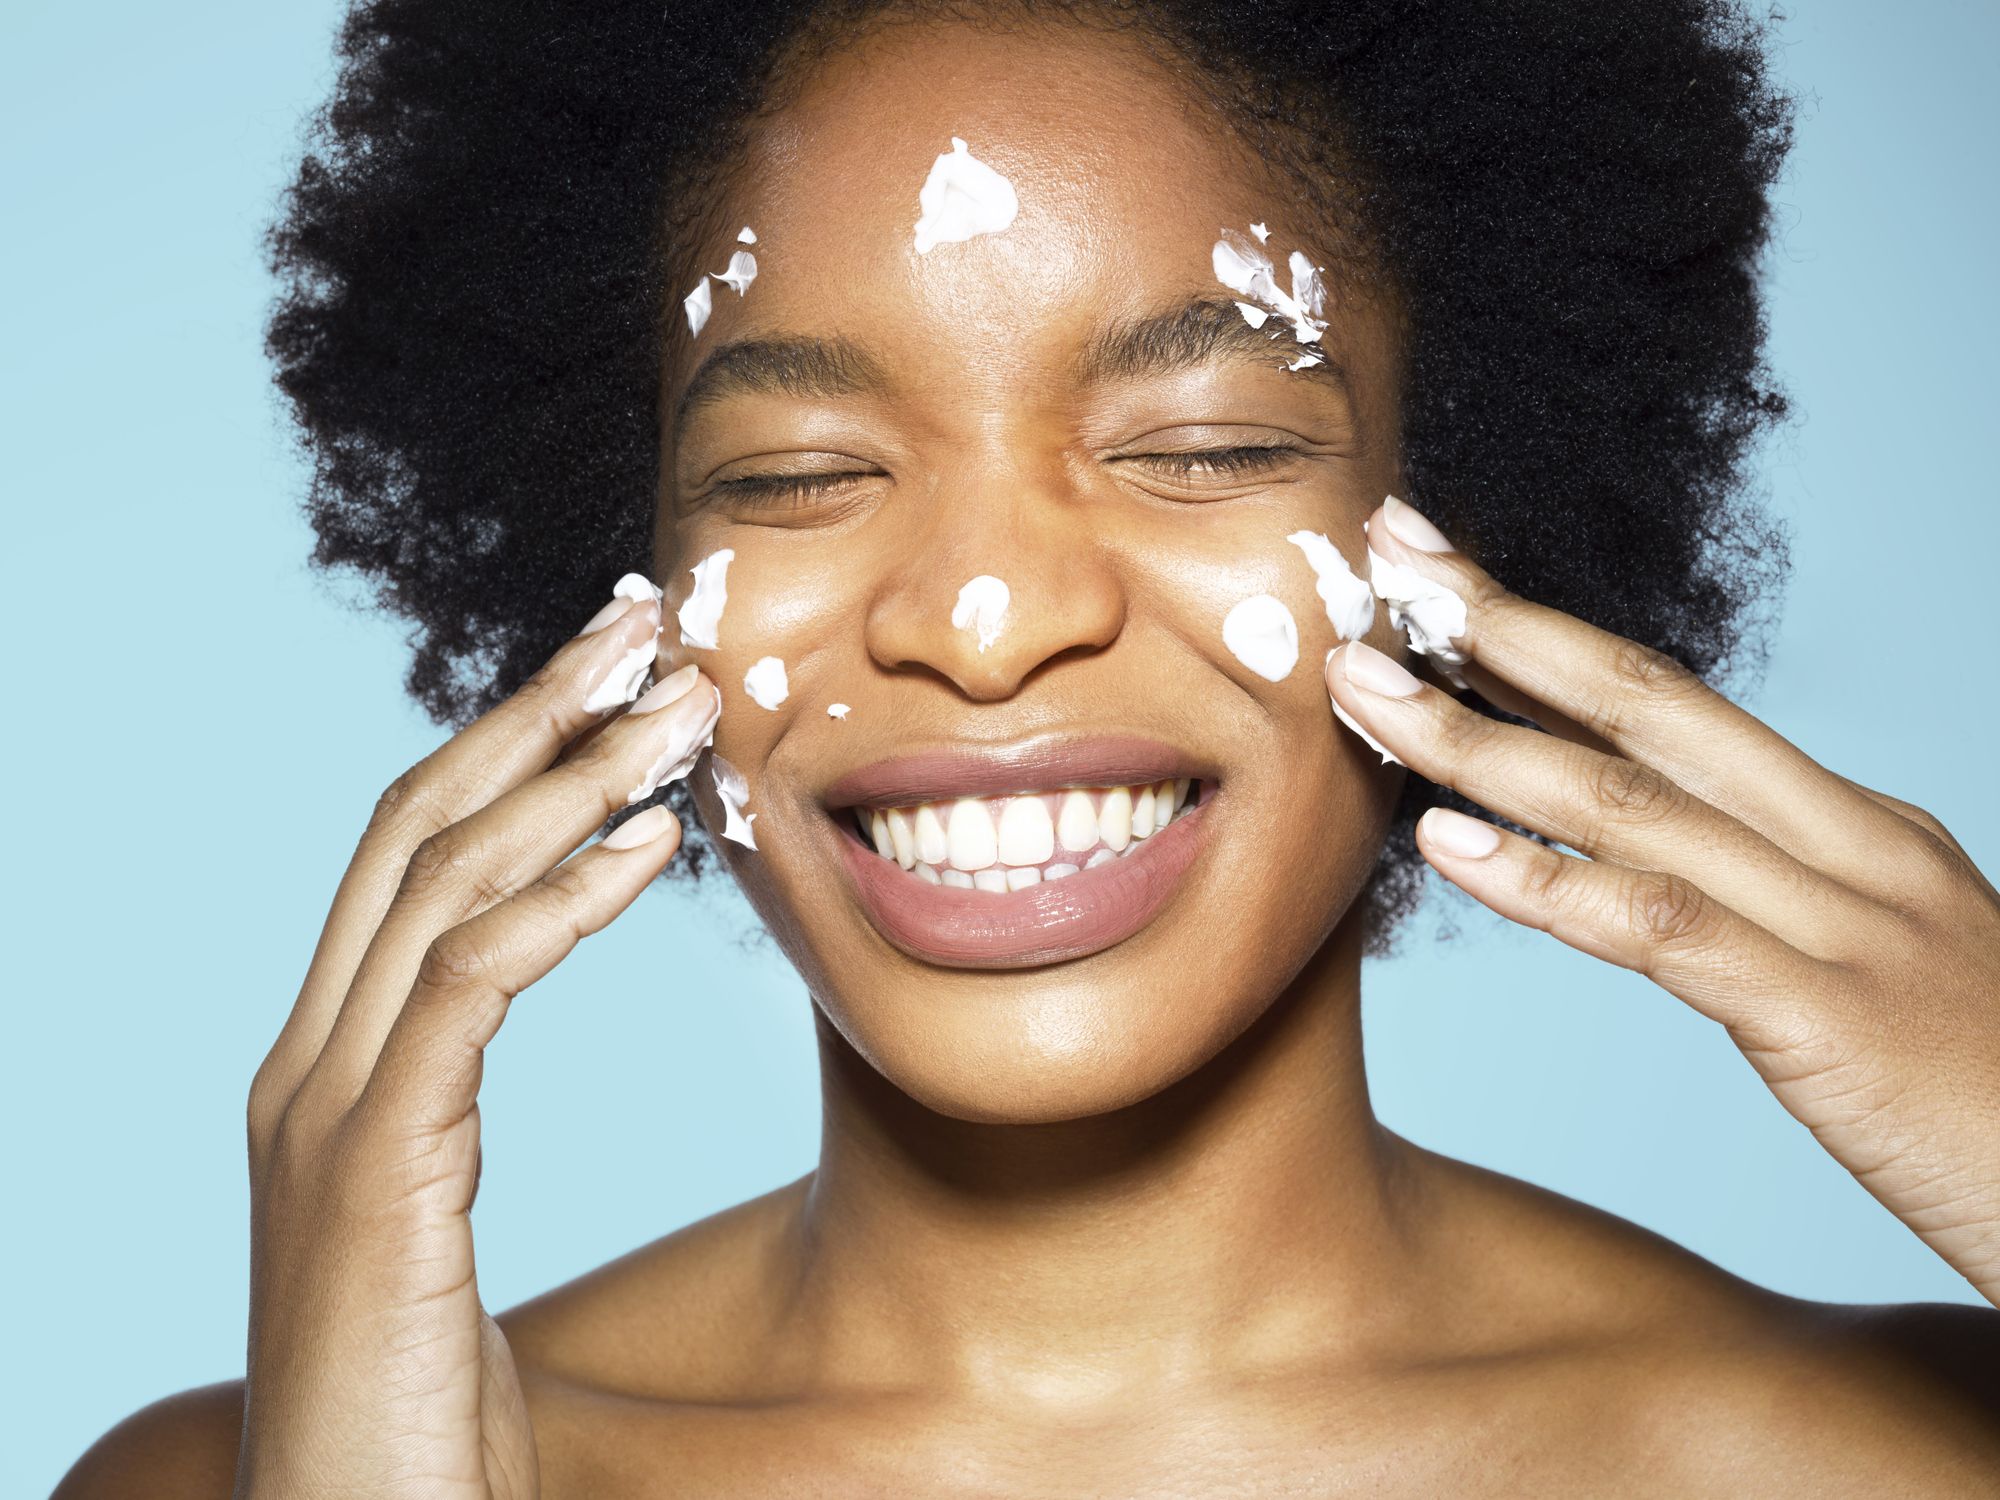 Should You Wash Your Face With Cold or Hot Water? We Asked